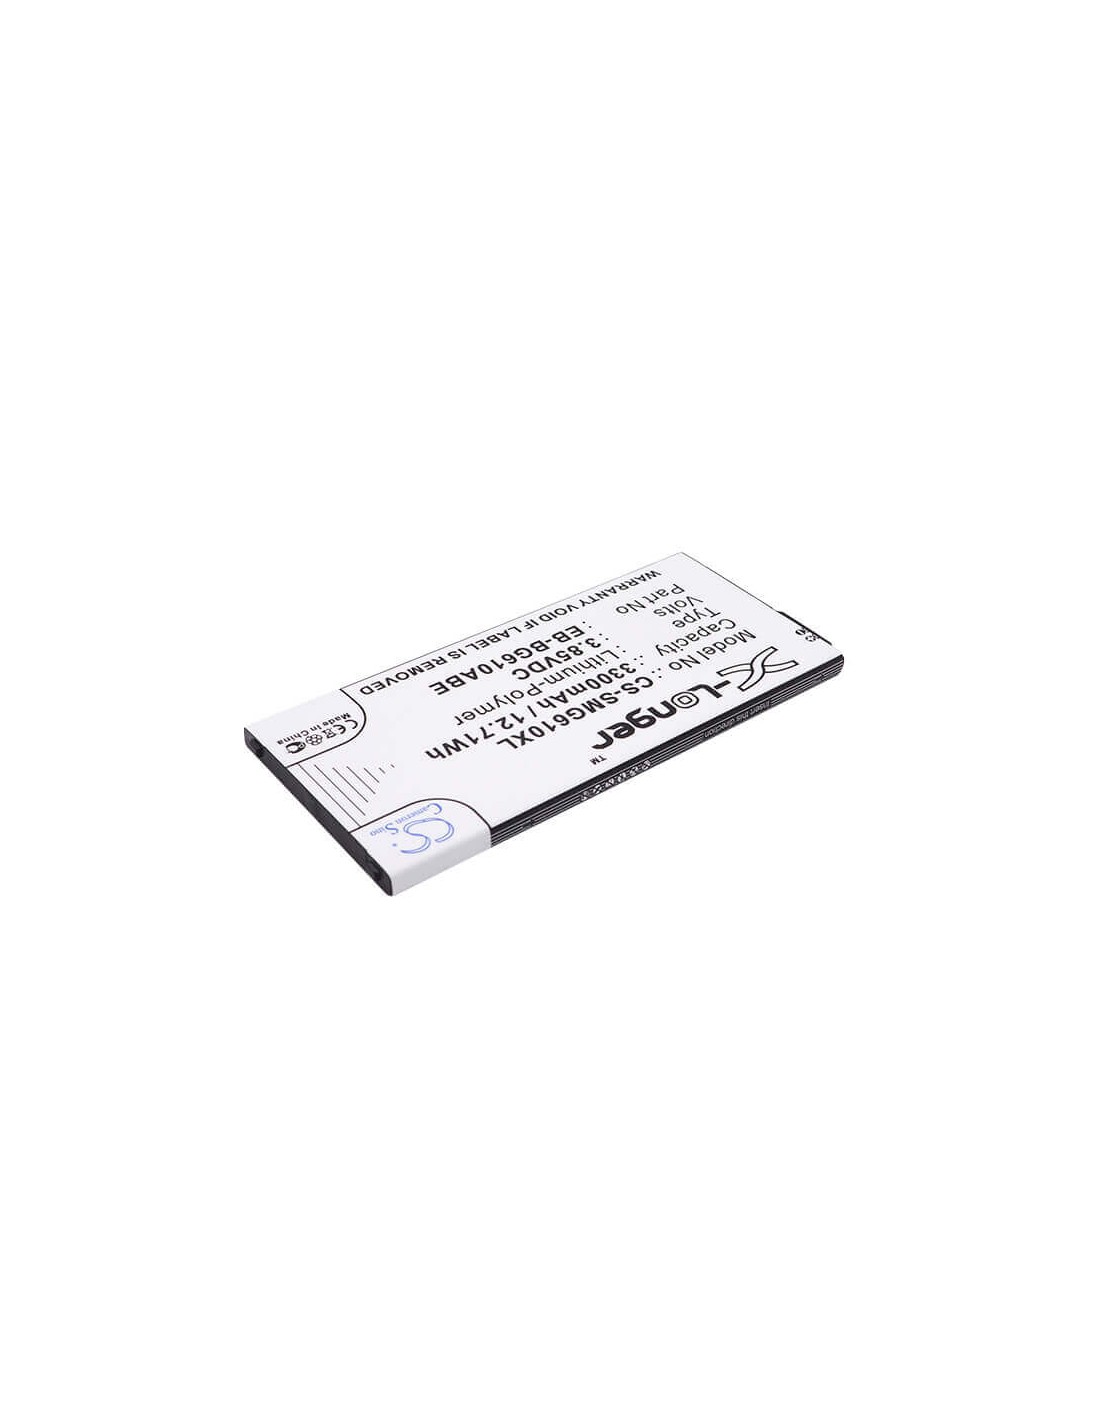 Battery for Samsung, Galaxy On7 2016 Duos 3.85V, 3300mAh - 12.71Wh